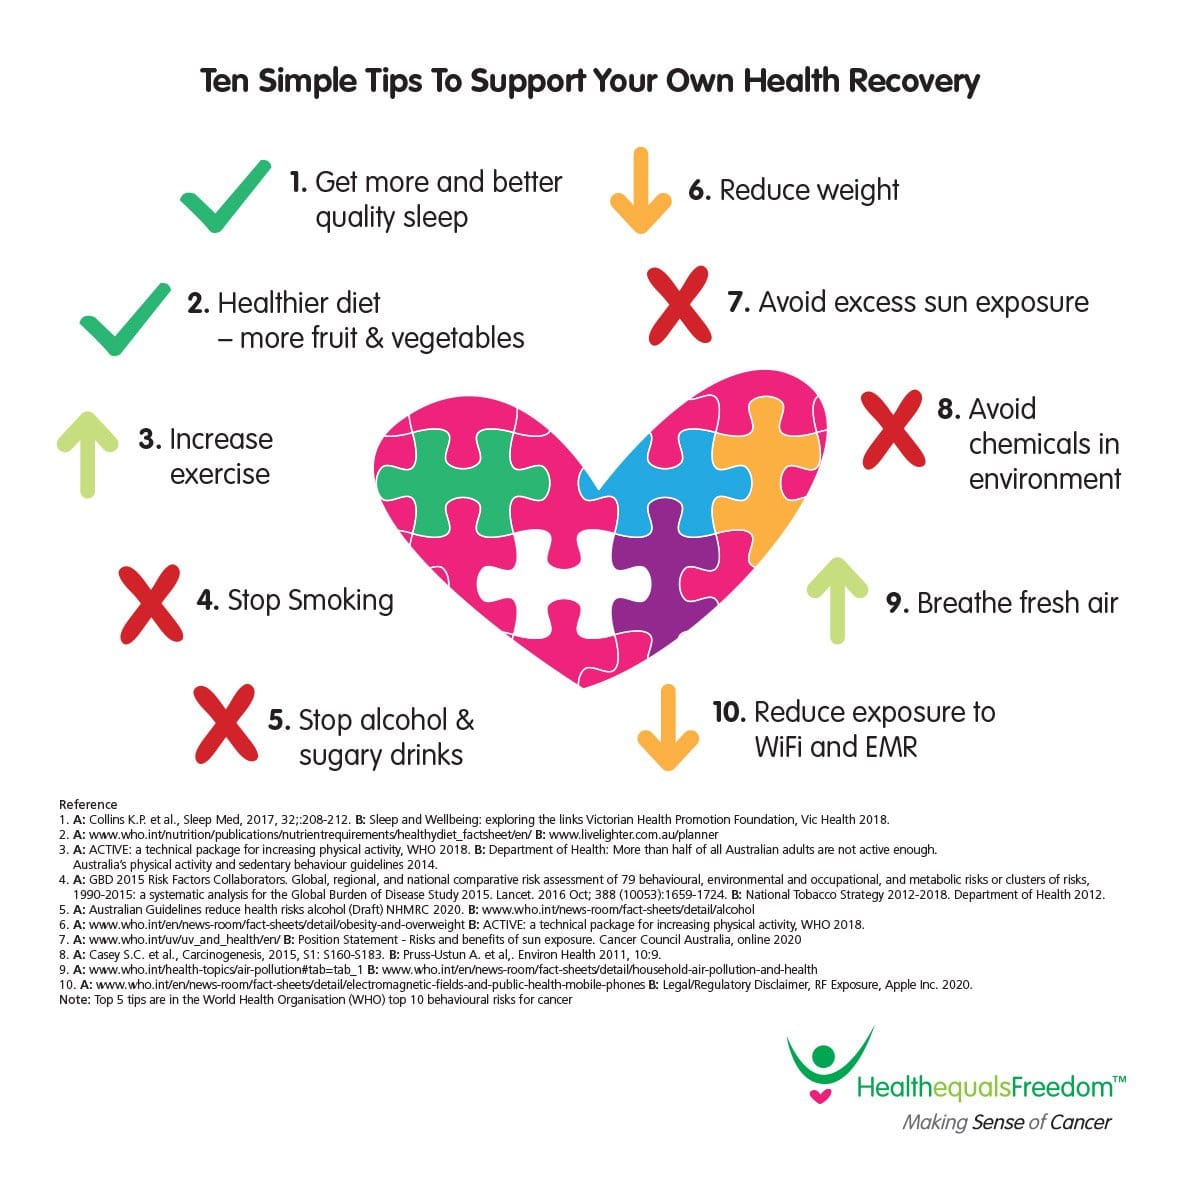 Ten Simple Tips to Support Your Own Health Recovery